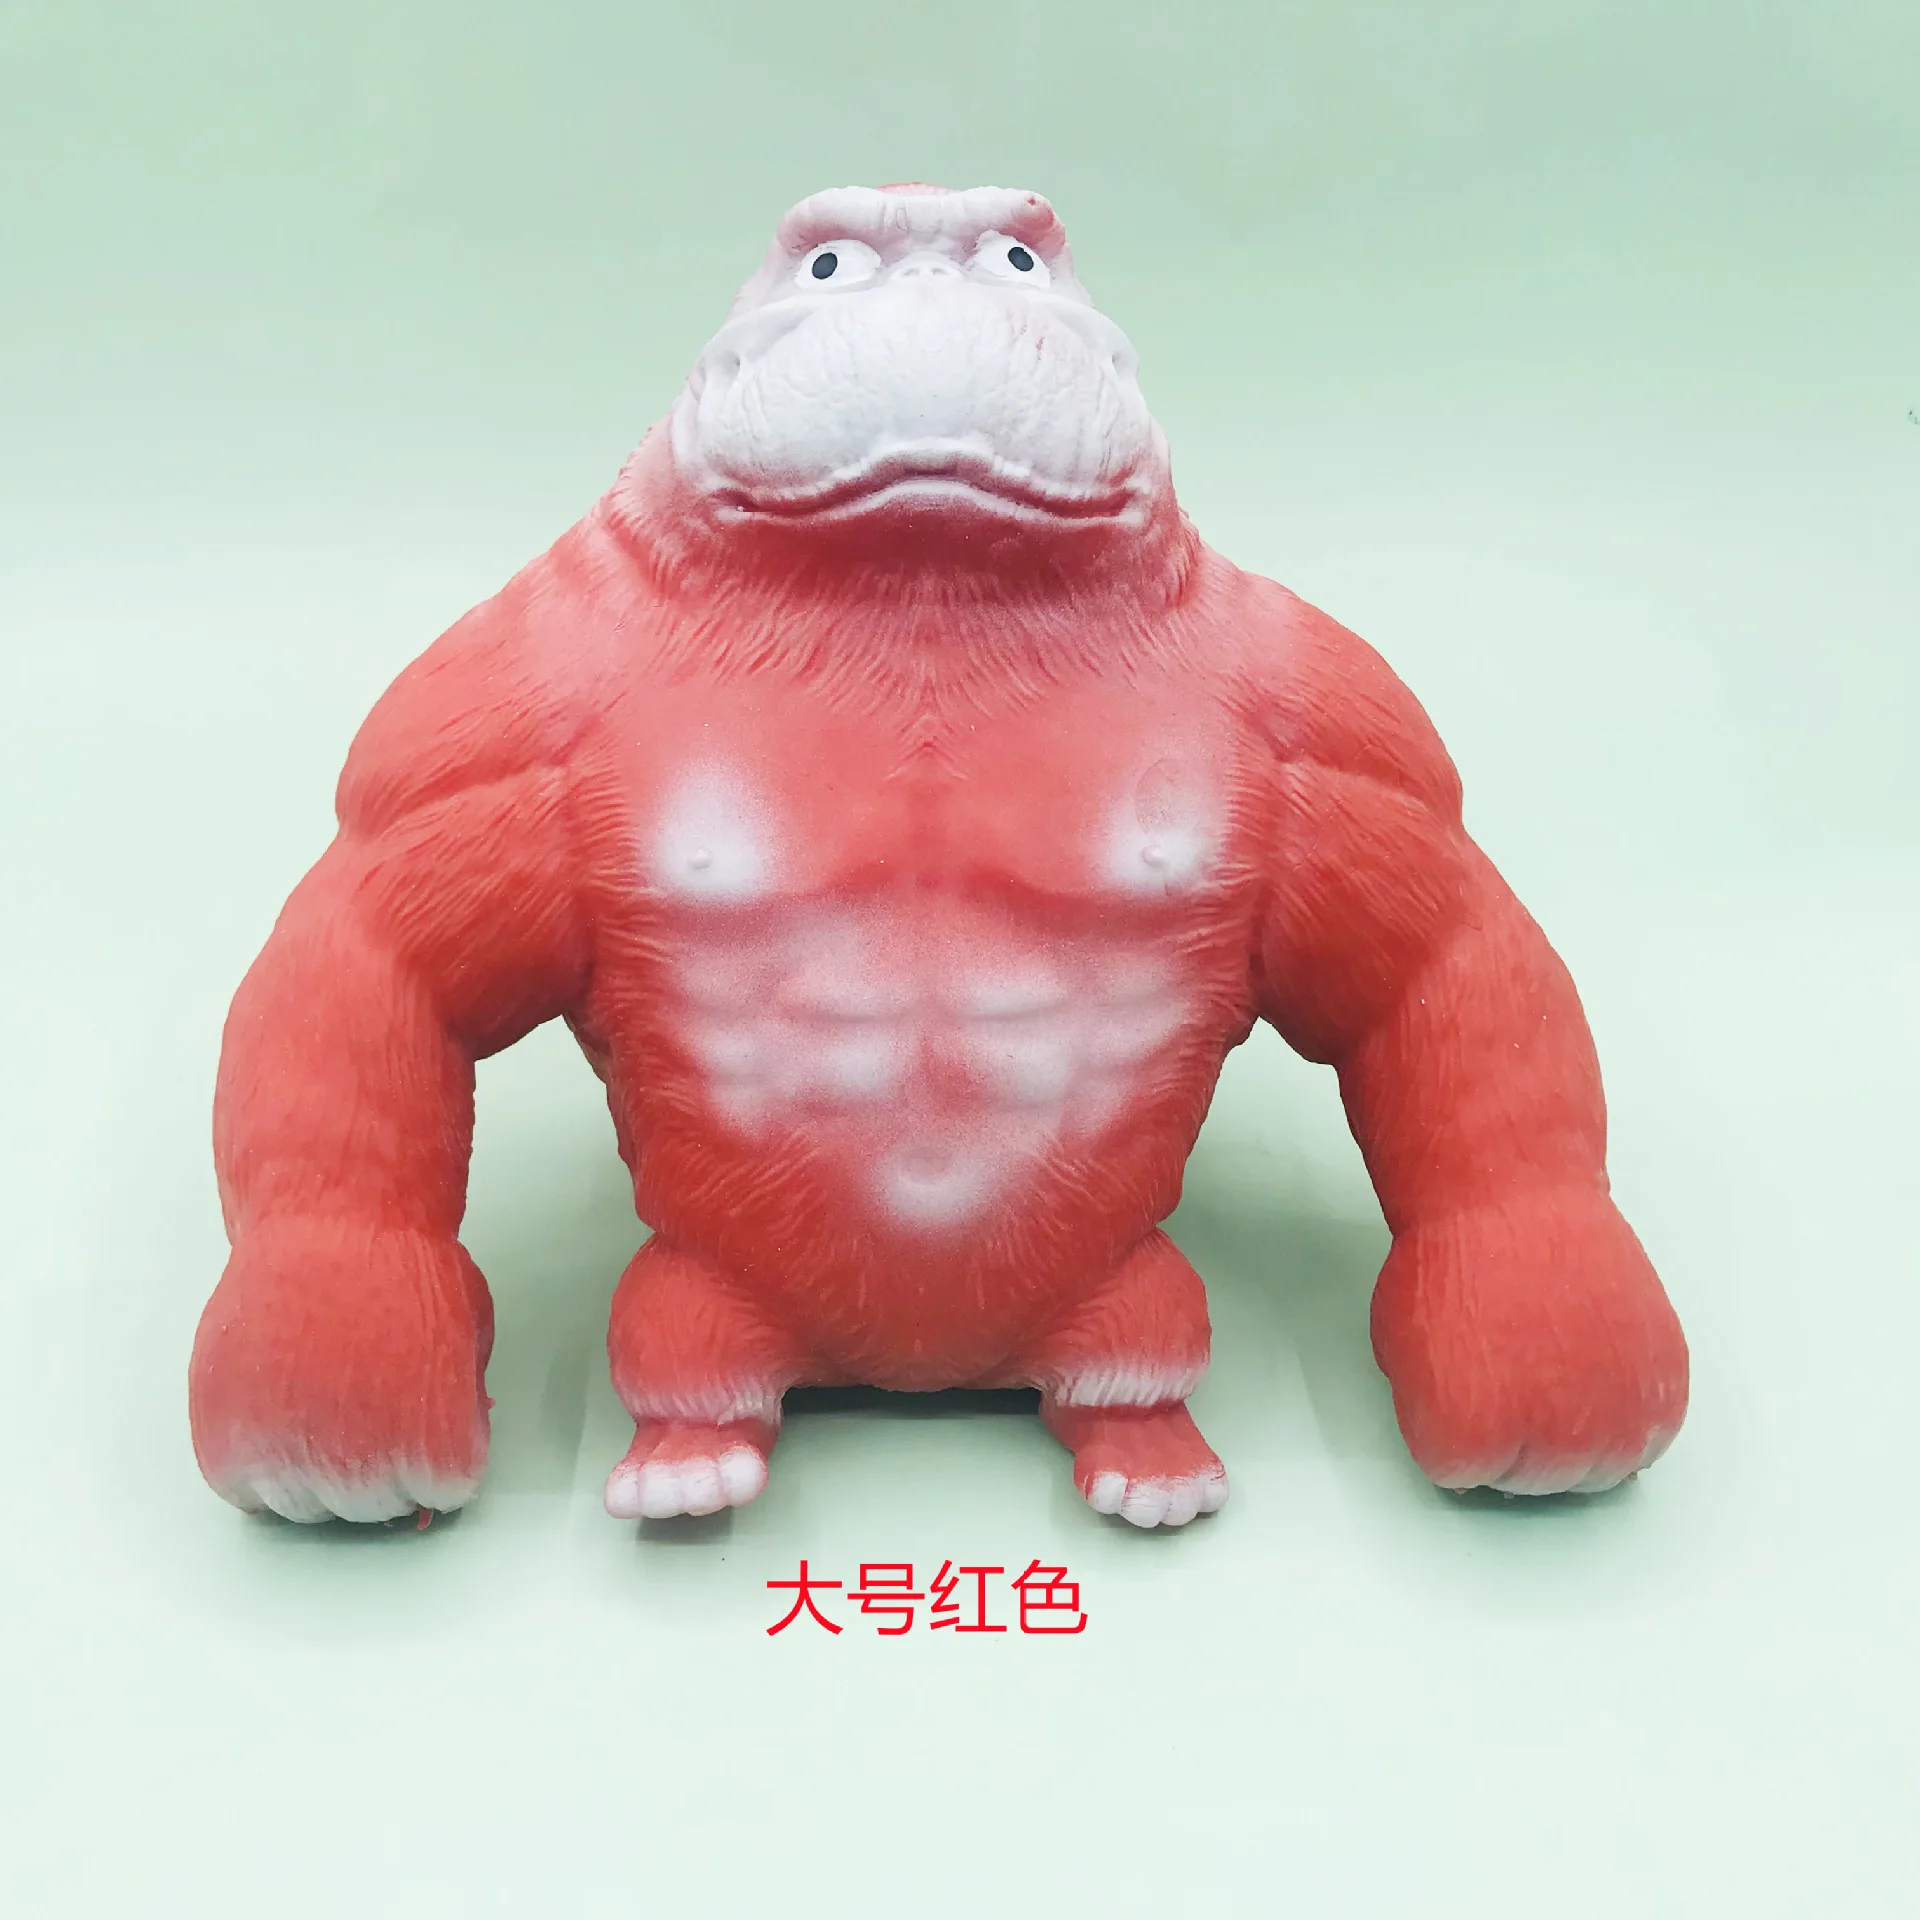 1pc Polyester Tricky Toy, Creative Monkey Design Toy For Kids